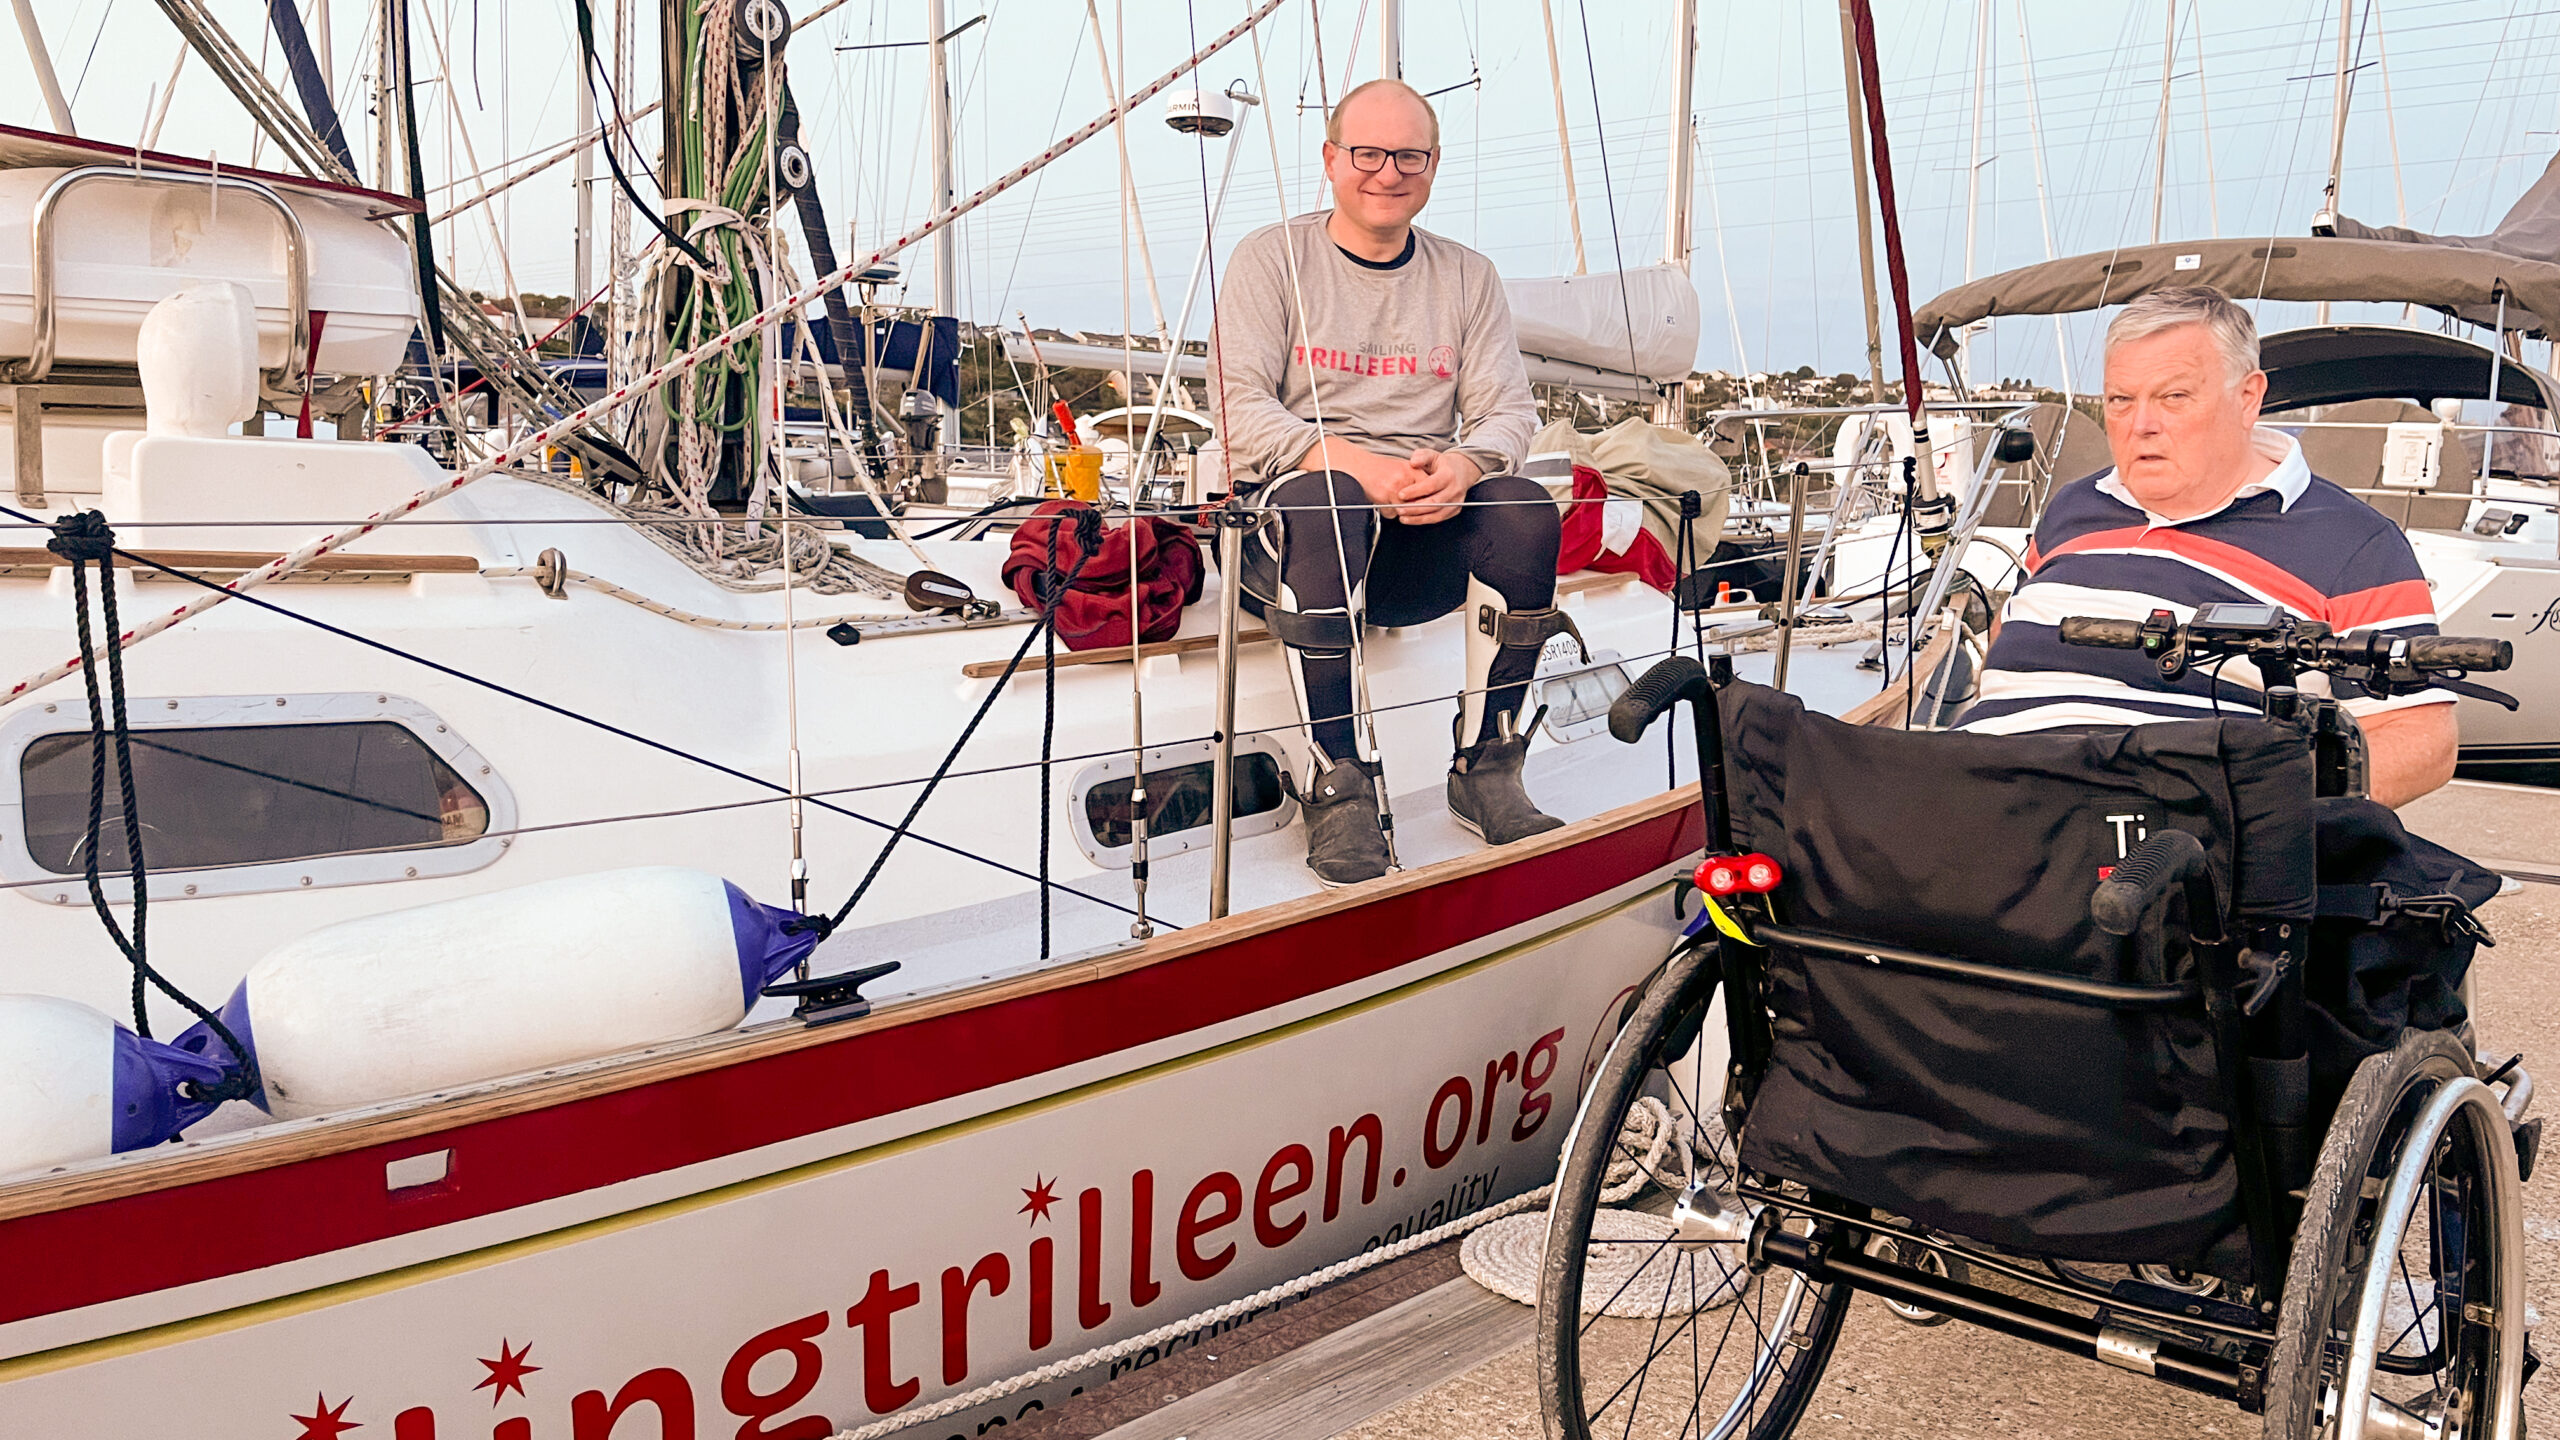 Solo sailor Ian sits on the deck of his boat Trilleen. he is wearing large splints on his legs. IN the foreground on a pontoon is his wheelchair and next to the wheelchair is John Twomey, president of Irish Sailing who is a paraplegic and is also using a wheelchair.